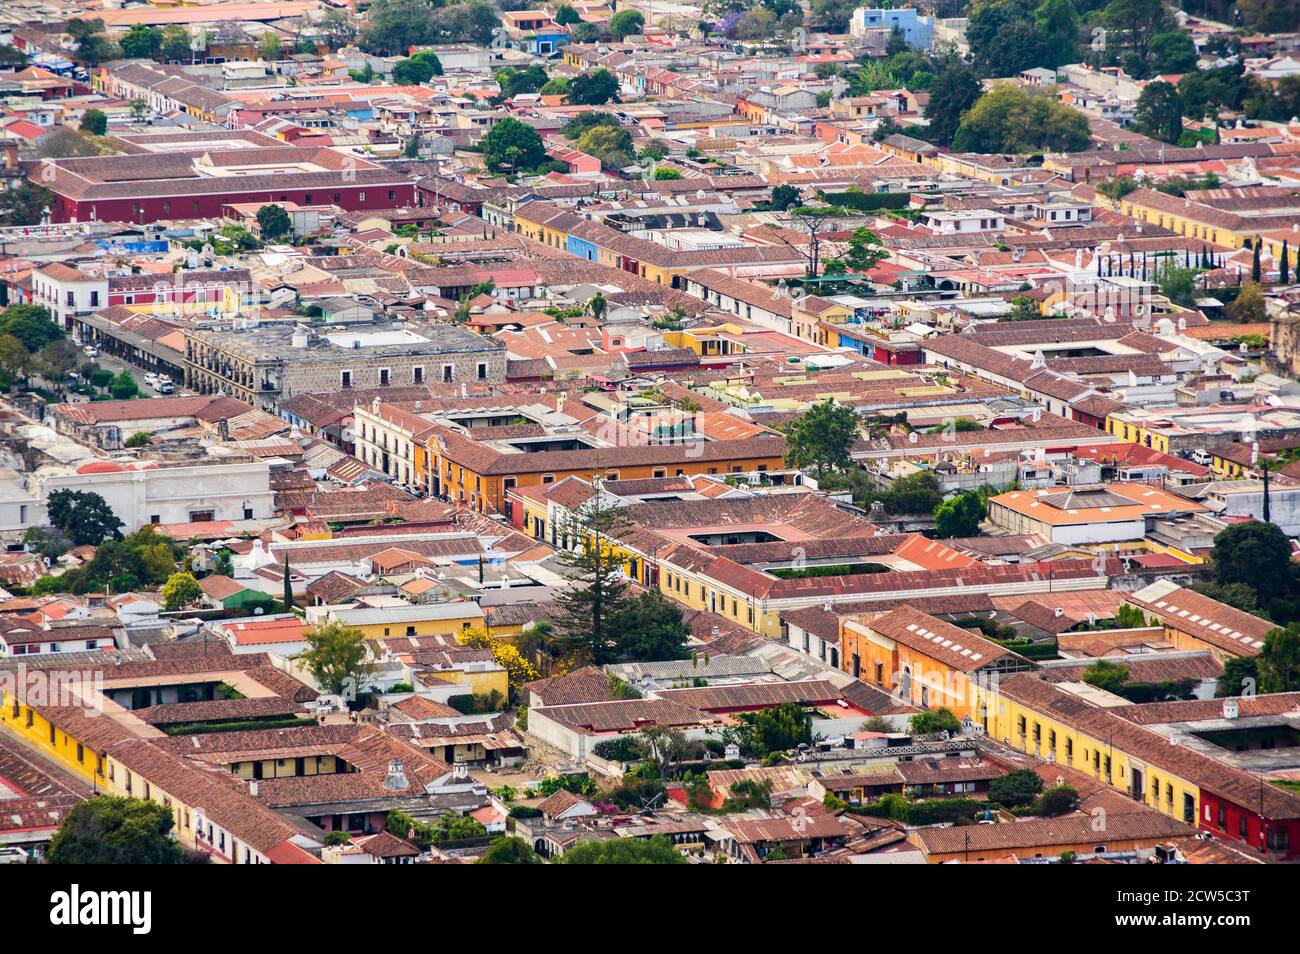 An isometric view of Antigua, A UNESCO World Heritage site in Guatemala Stock Photo